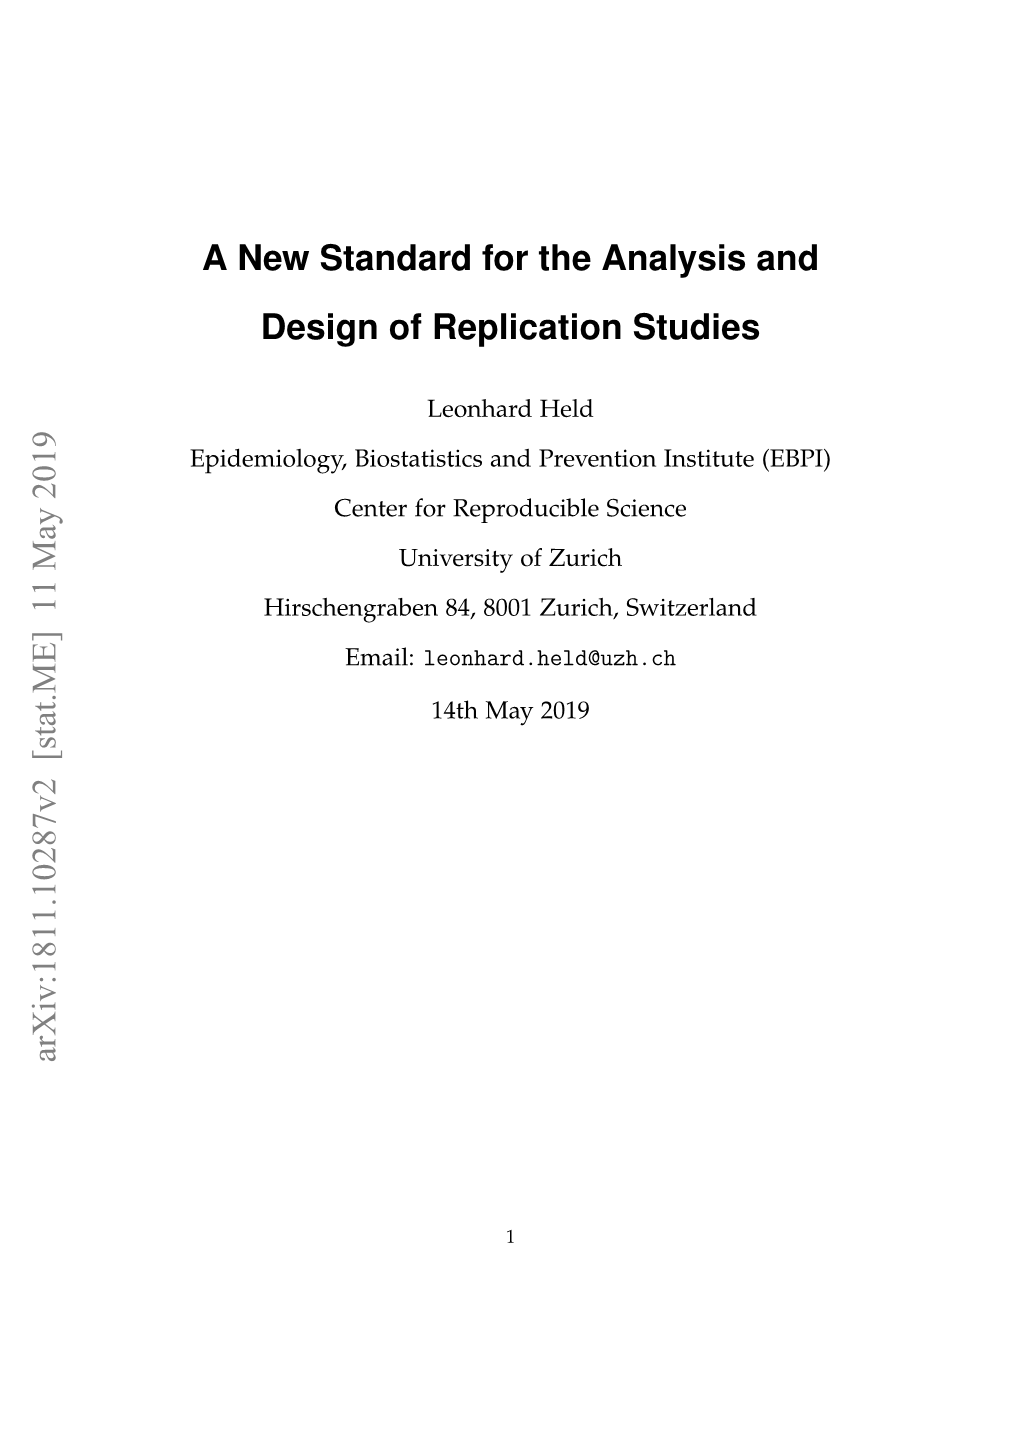 A New Standard for the Analysis and Design of Replication Studies